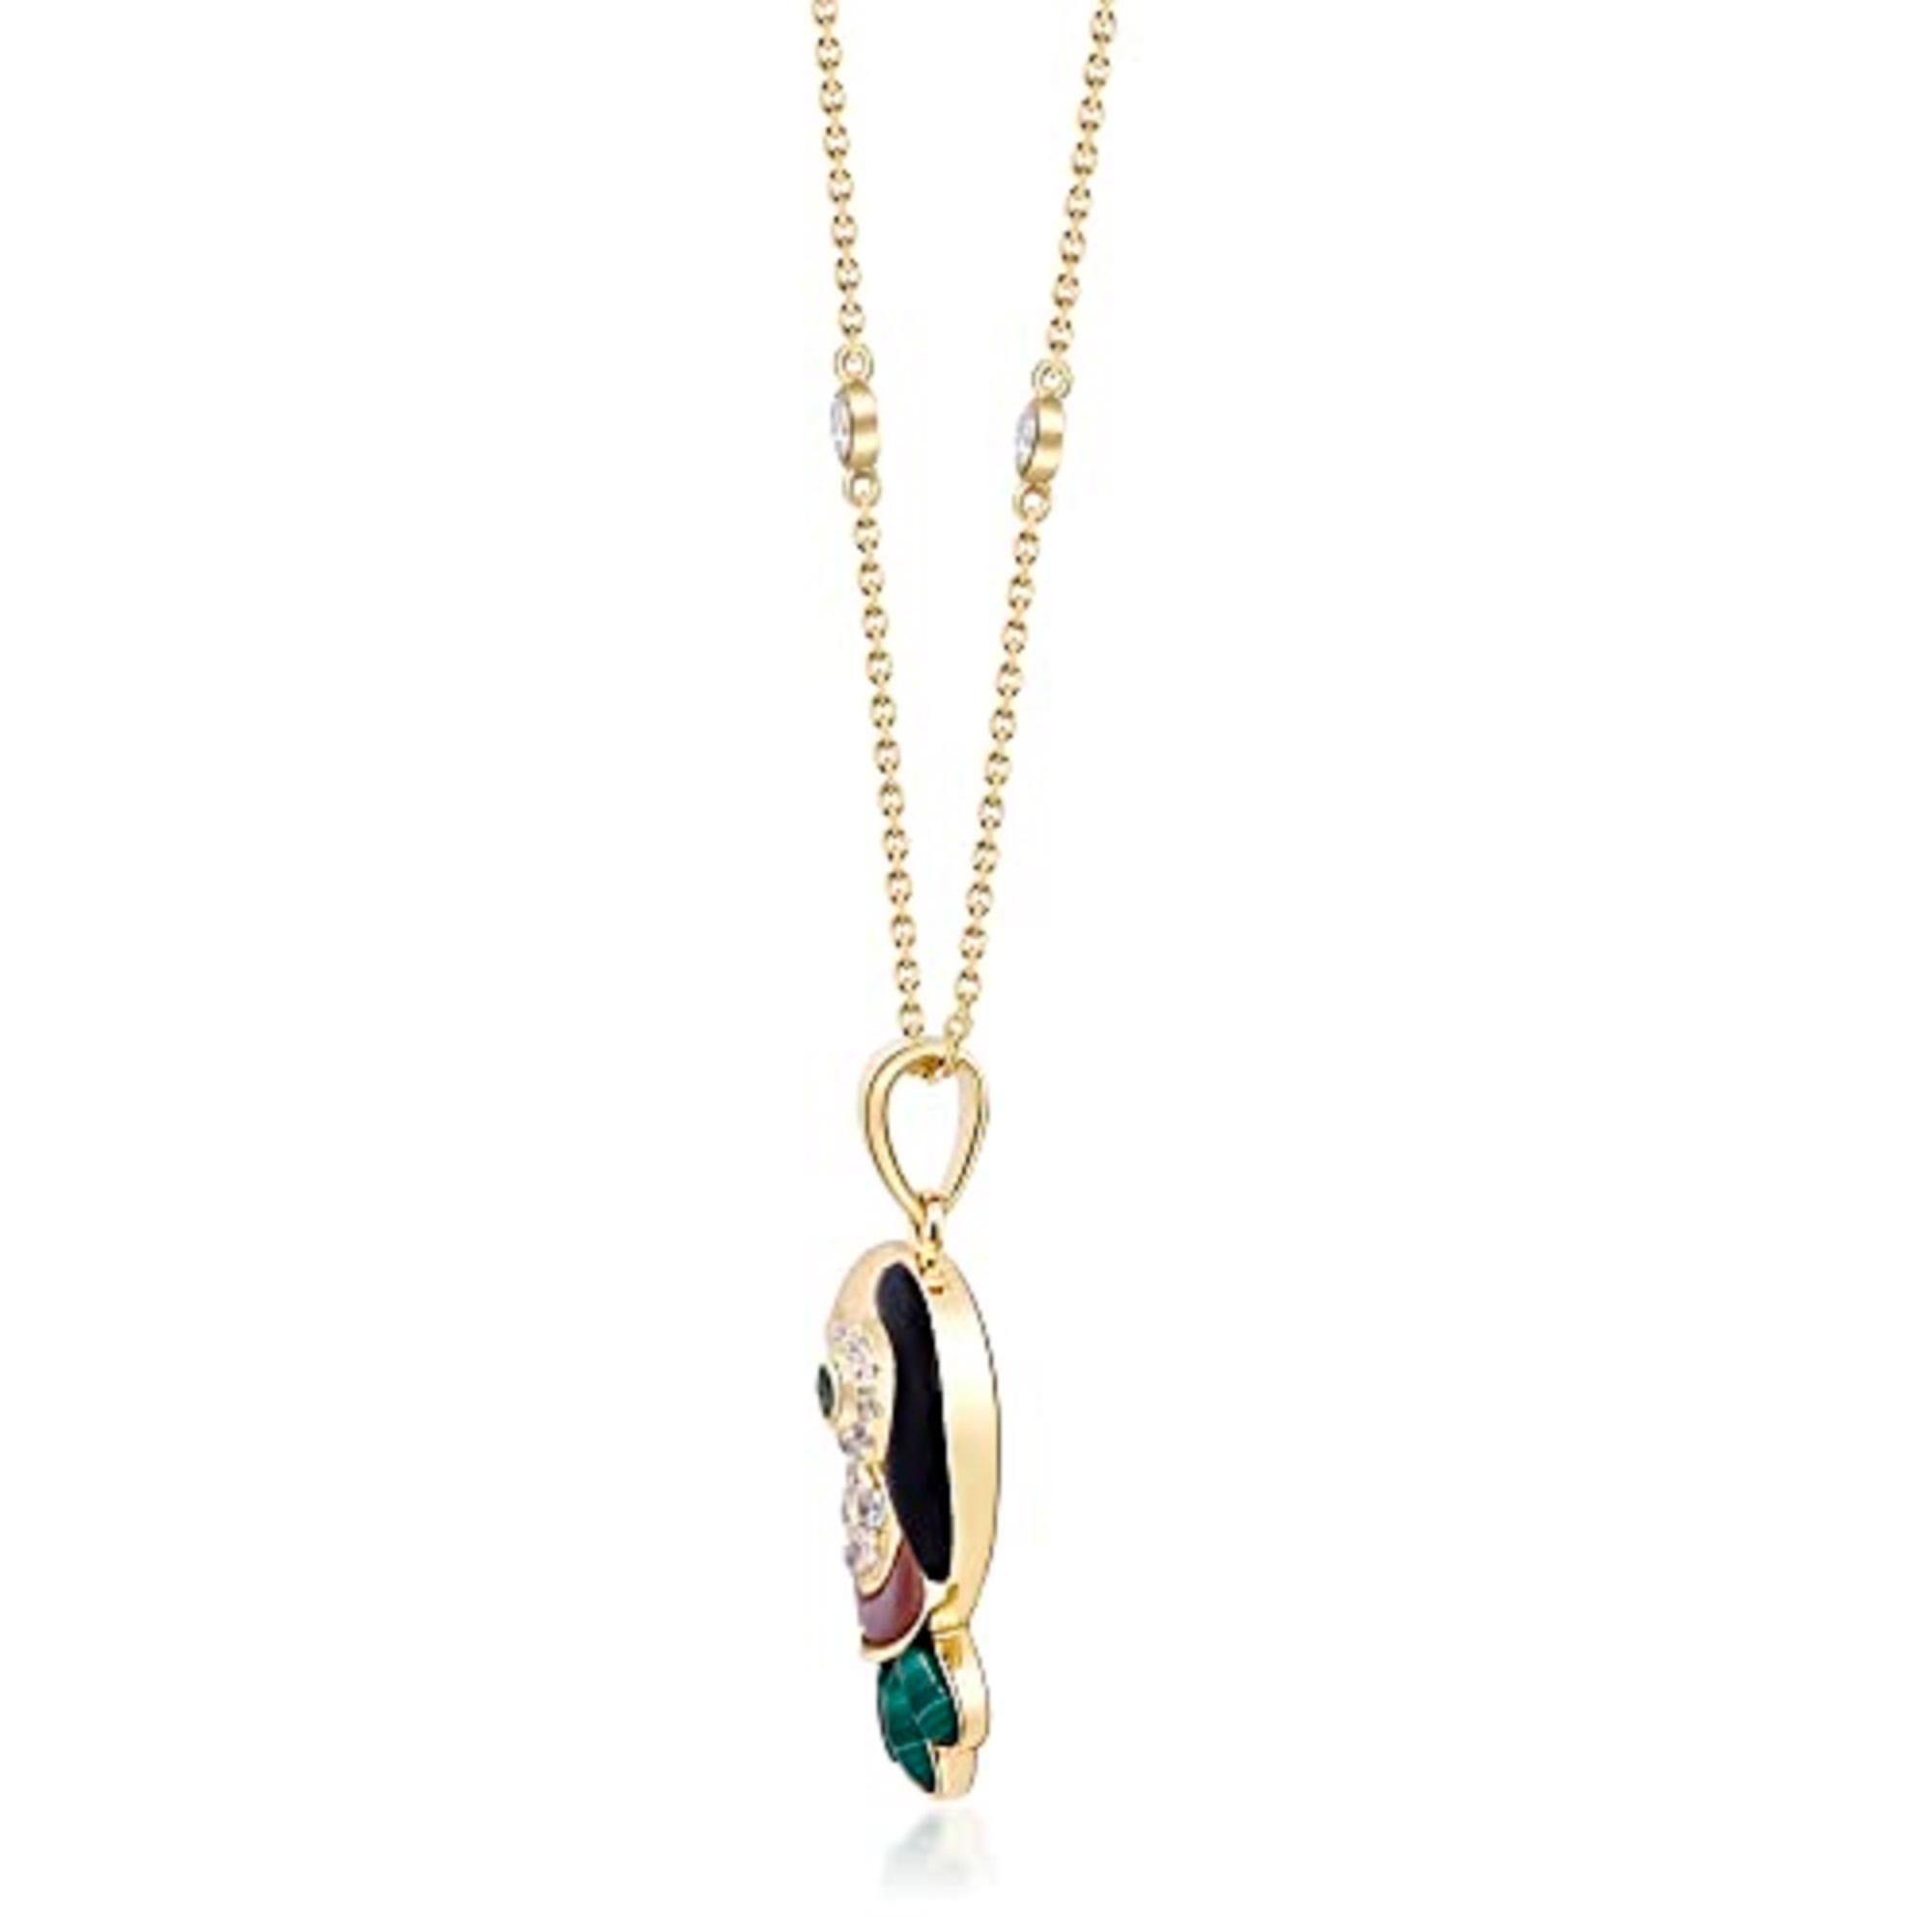 Decorate yourself in elegance with this Pendant is crafted from 14-karat Yellow Gold by Gin & Grace. This Pendant is made up of 2.0 mm Round-cut Emerald (1 pcs) 0.04 carat, malachite free fancy (3 pcs) 0.59 carat ,mother of pearl pink free (1 Pcs)